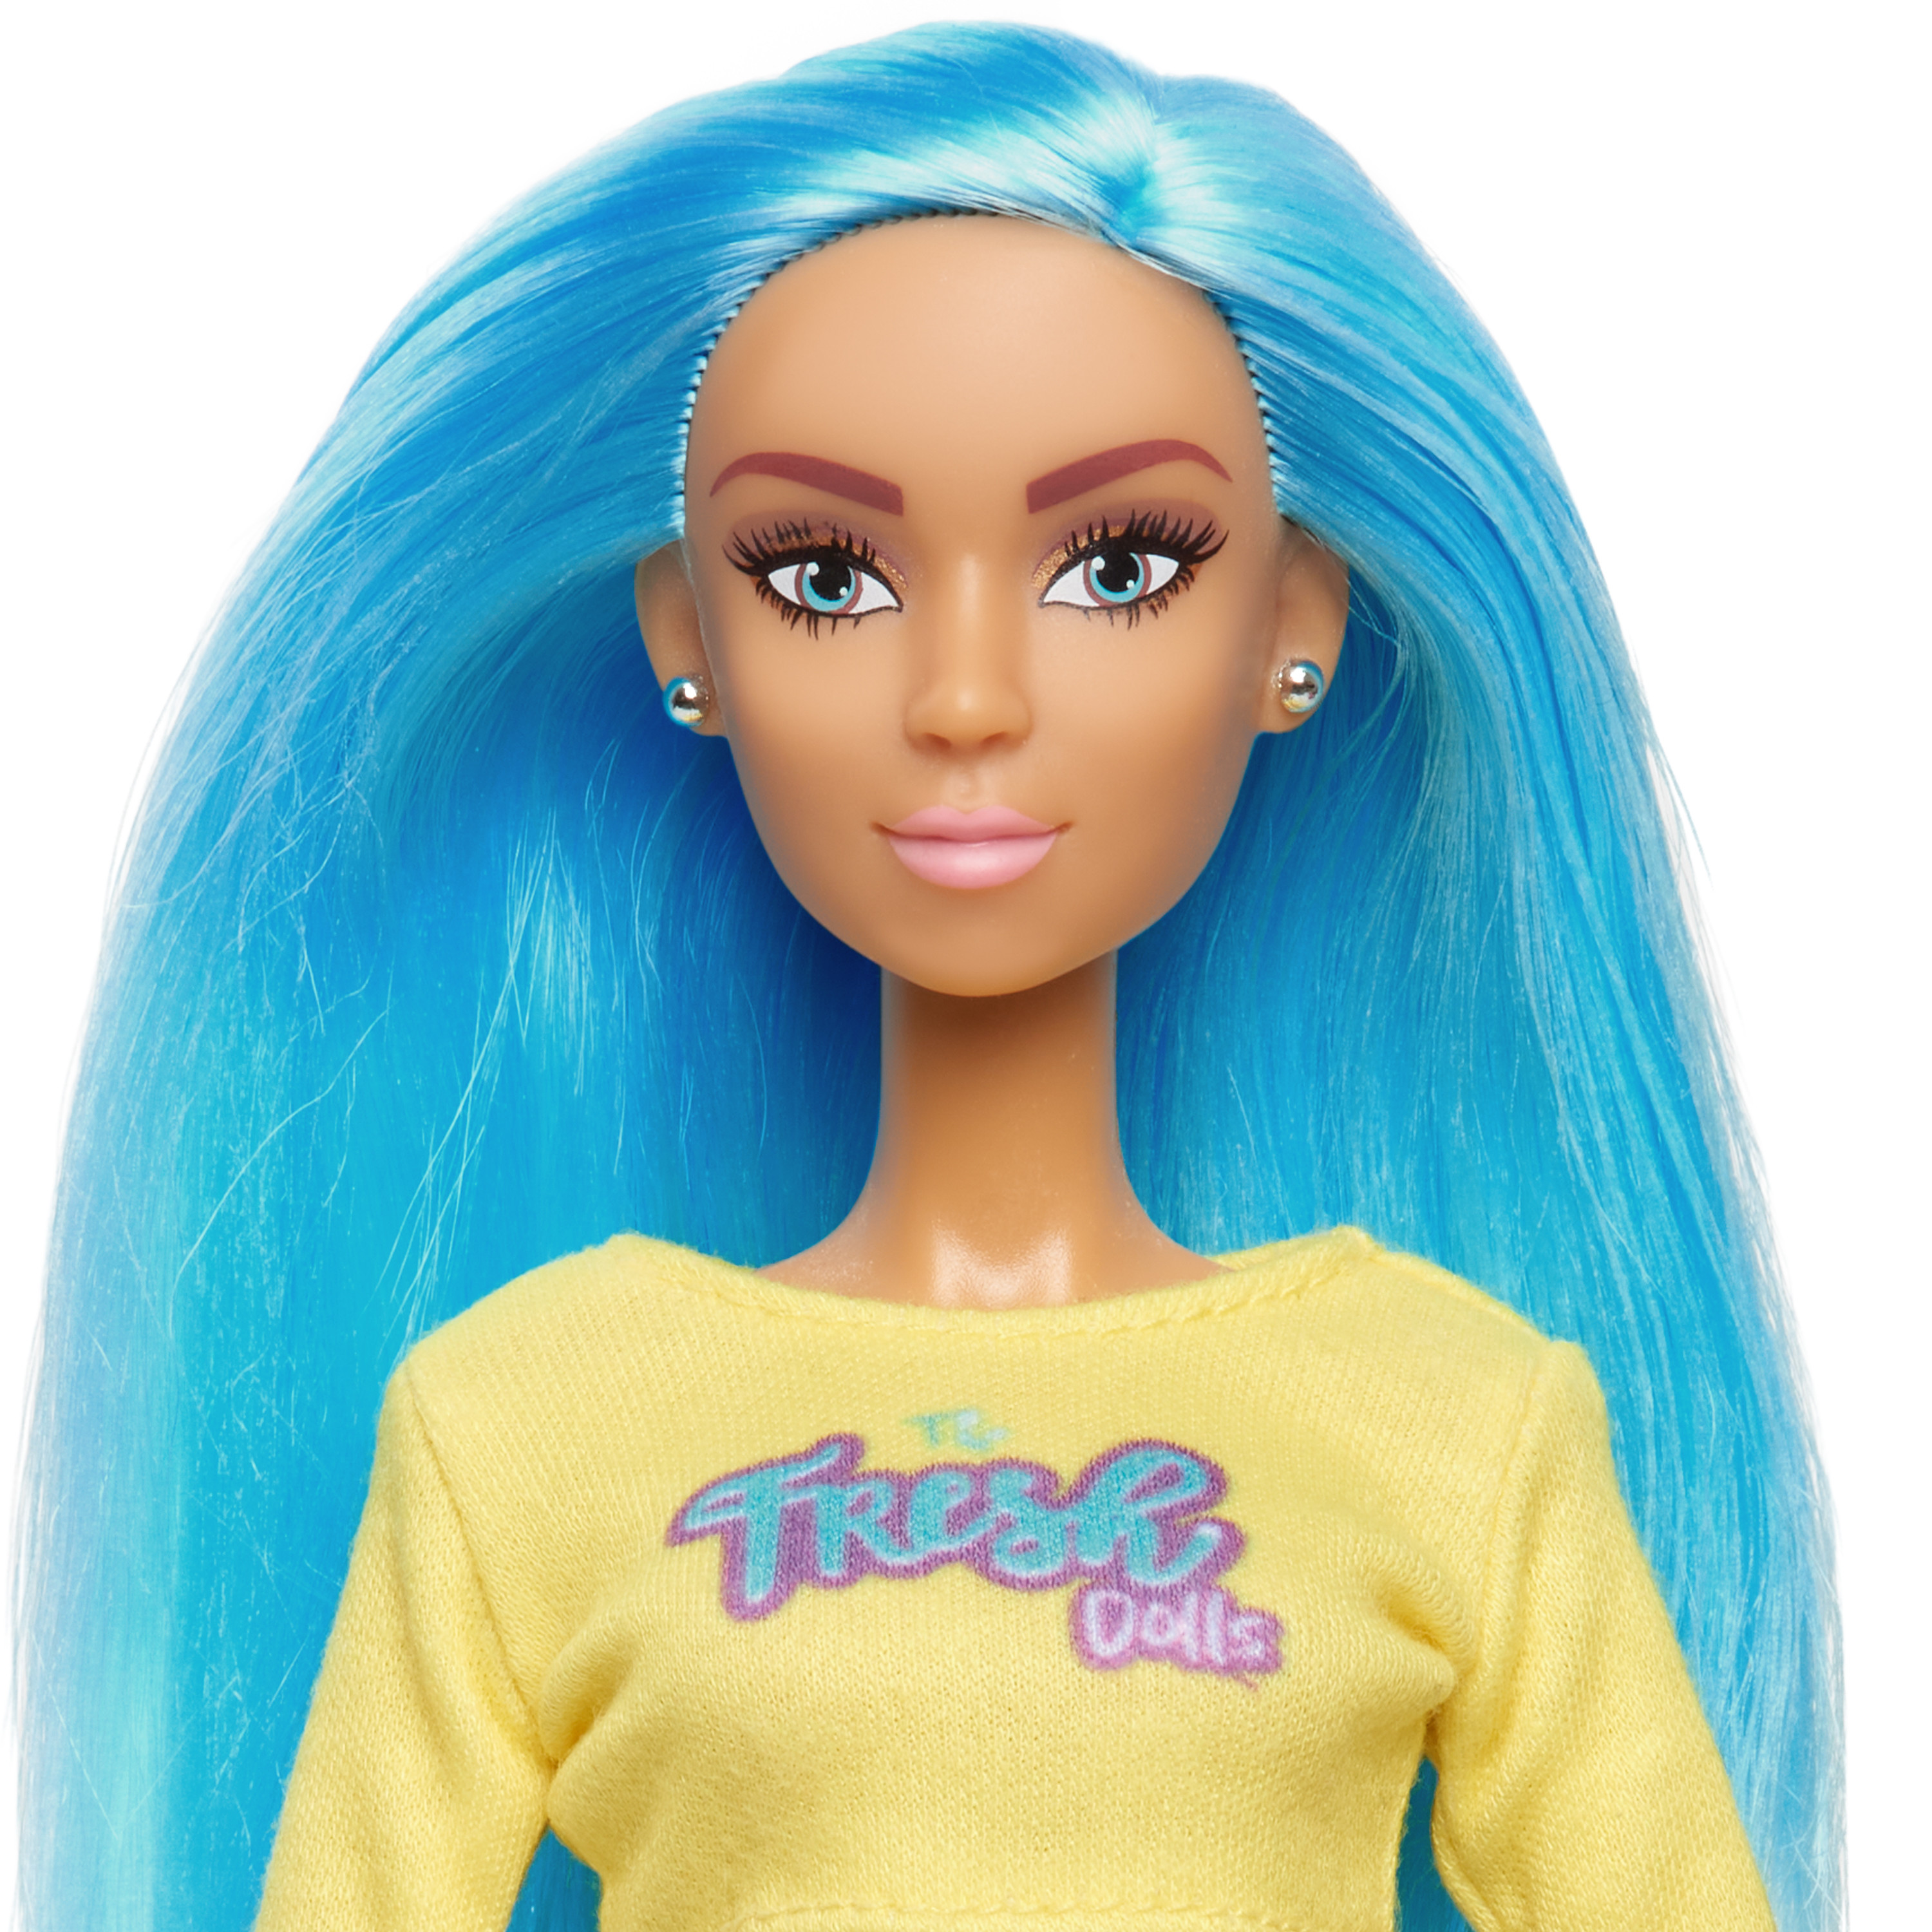 Fresh Dolls Skylar Fashion Doll, 11.5-inches tall, yellow shirt and jean shorts, blue hair,  Kids Toys for Ages 3 Up, Gifts and Presents - image 3 of 5